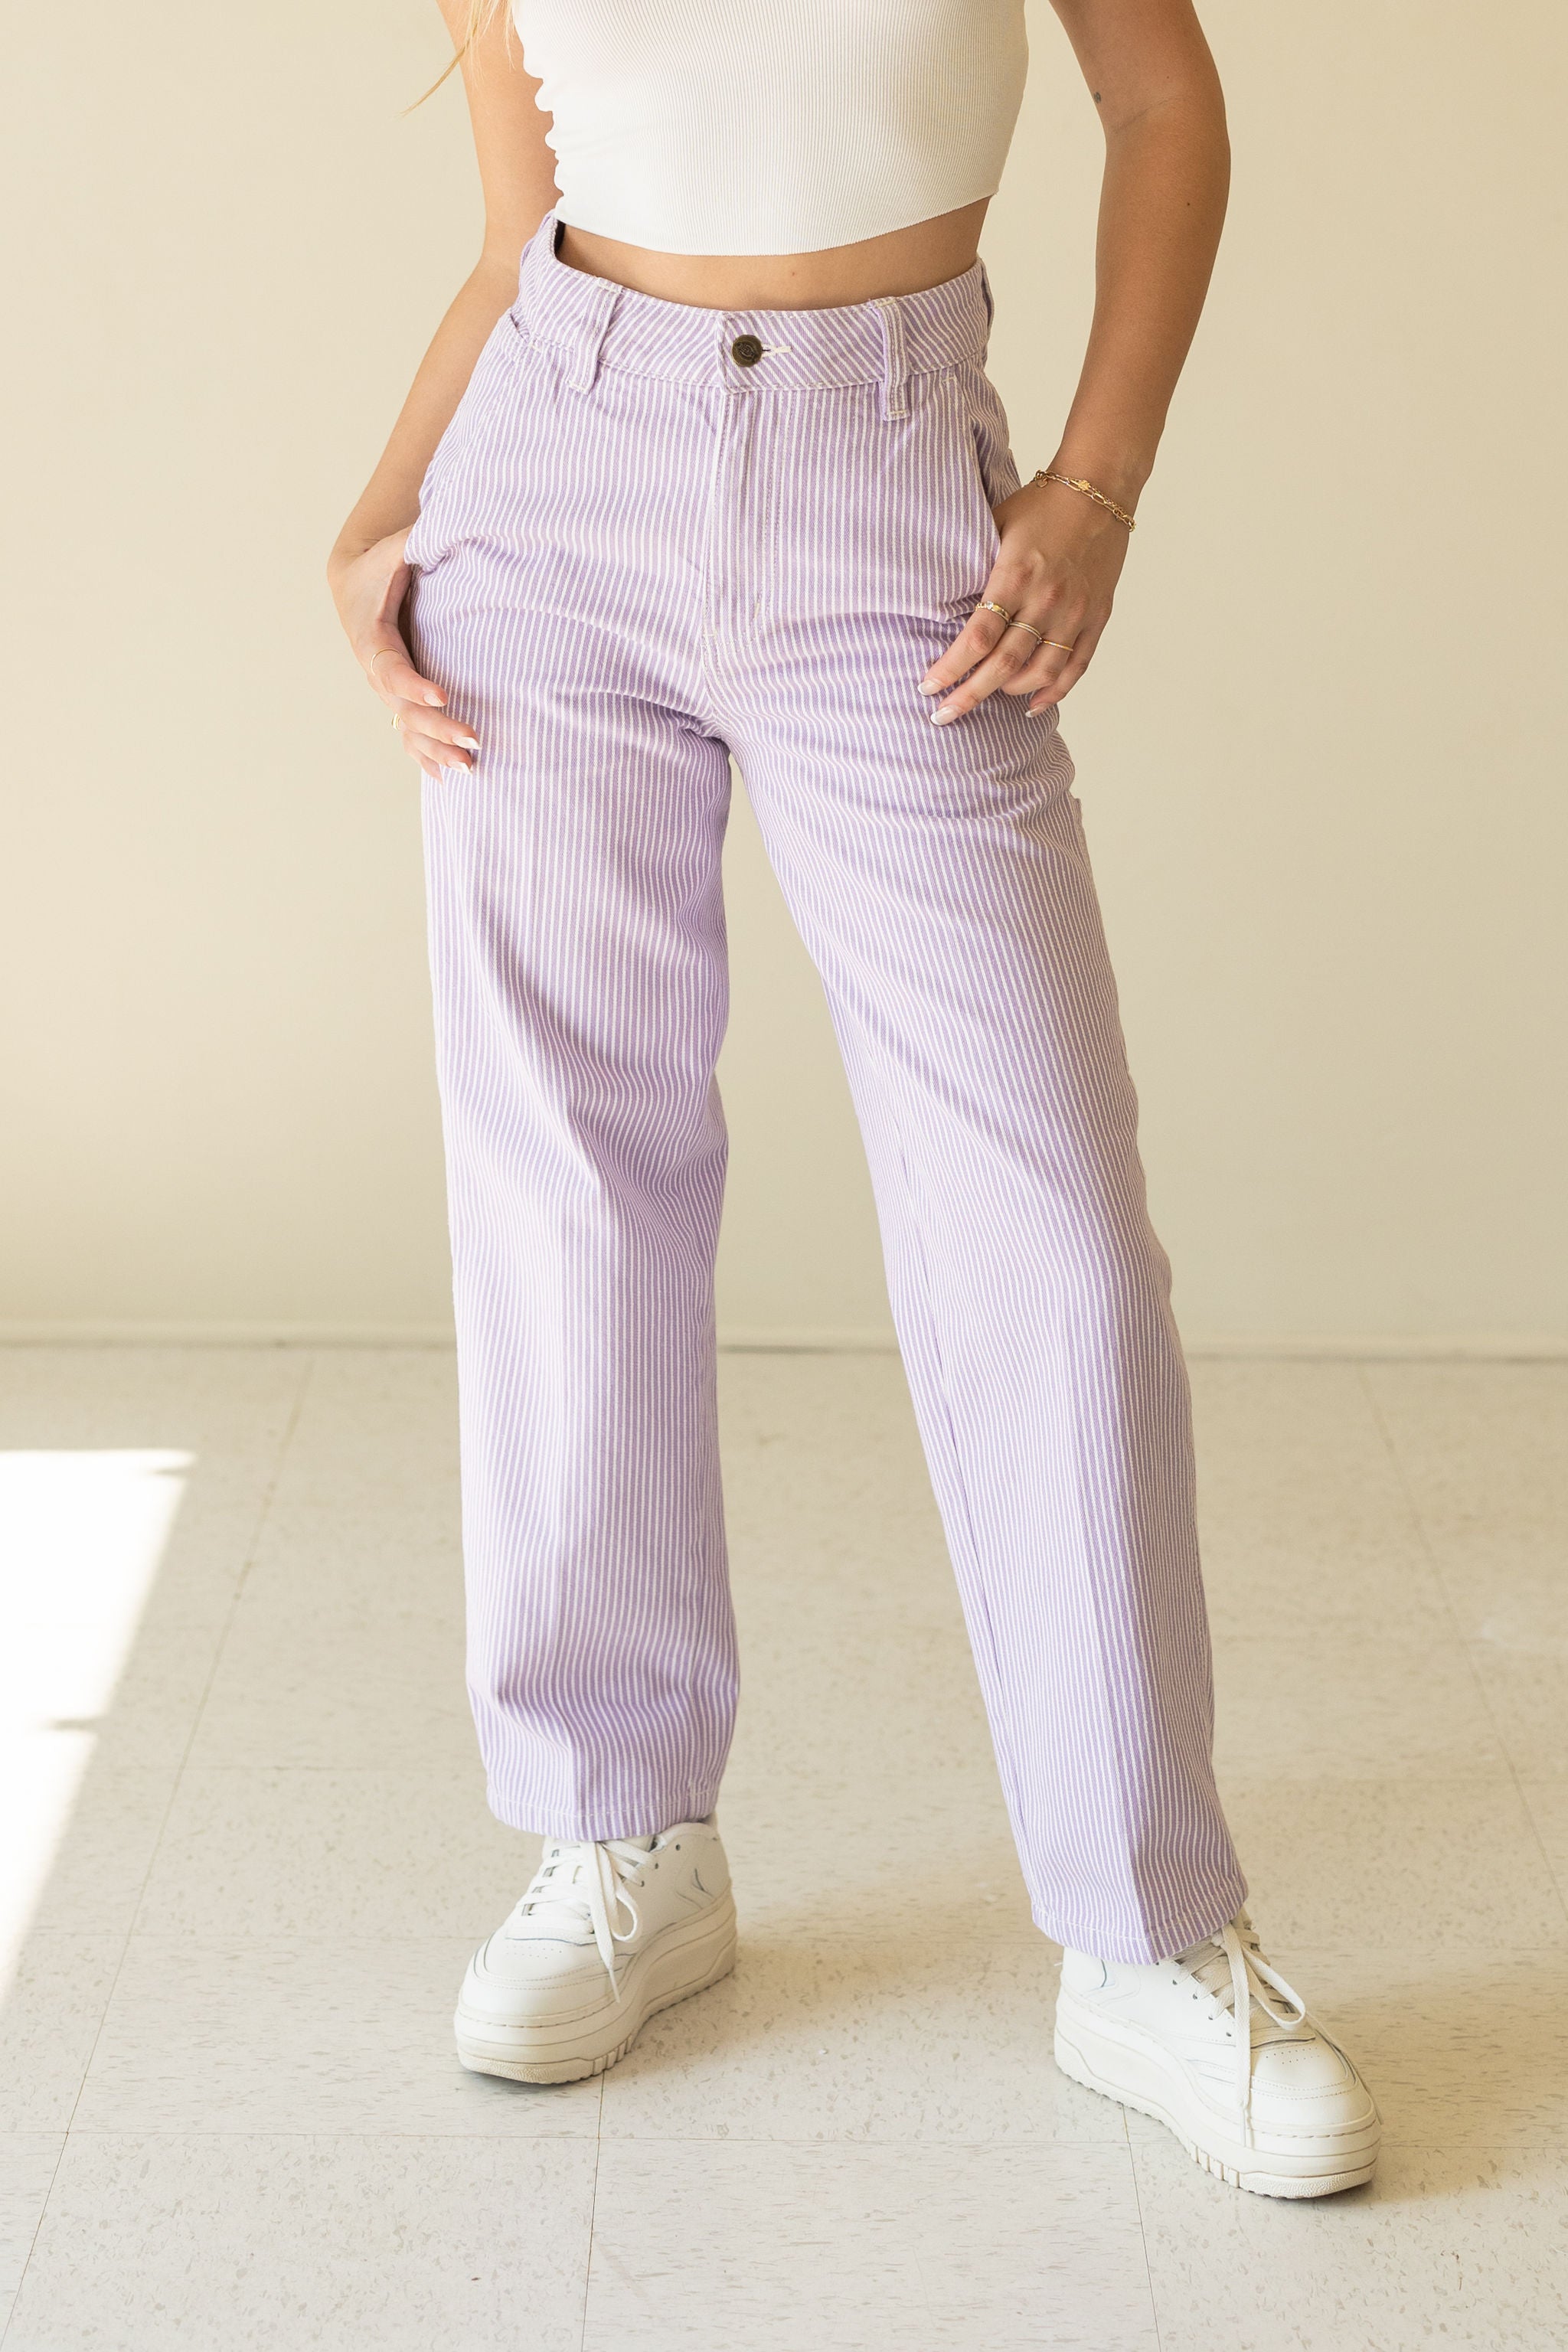 Hickory Stripe Pants by Dickies